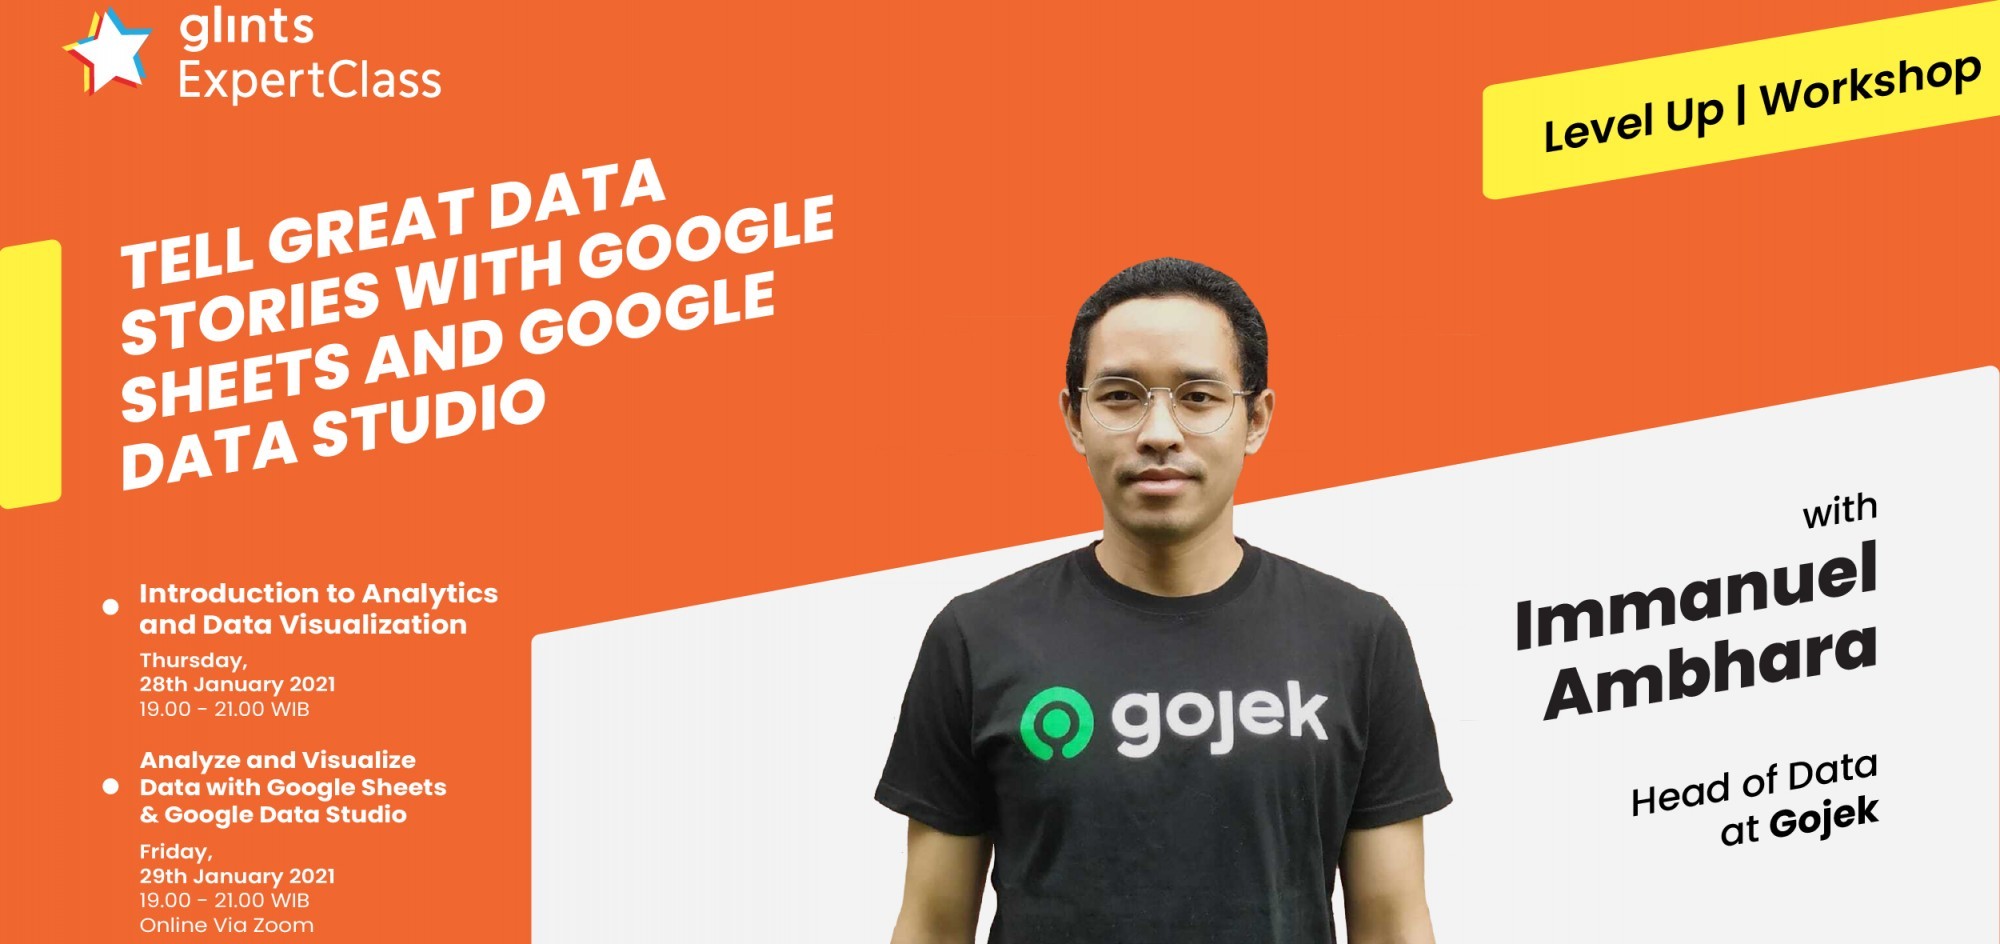 Data Analytics Workshop: Tell Great Data Stories With Google Sheets and Google Data Studio